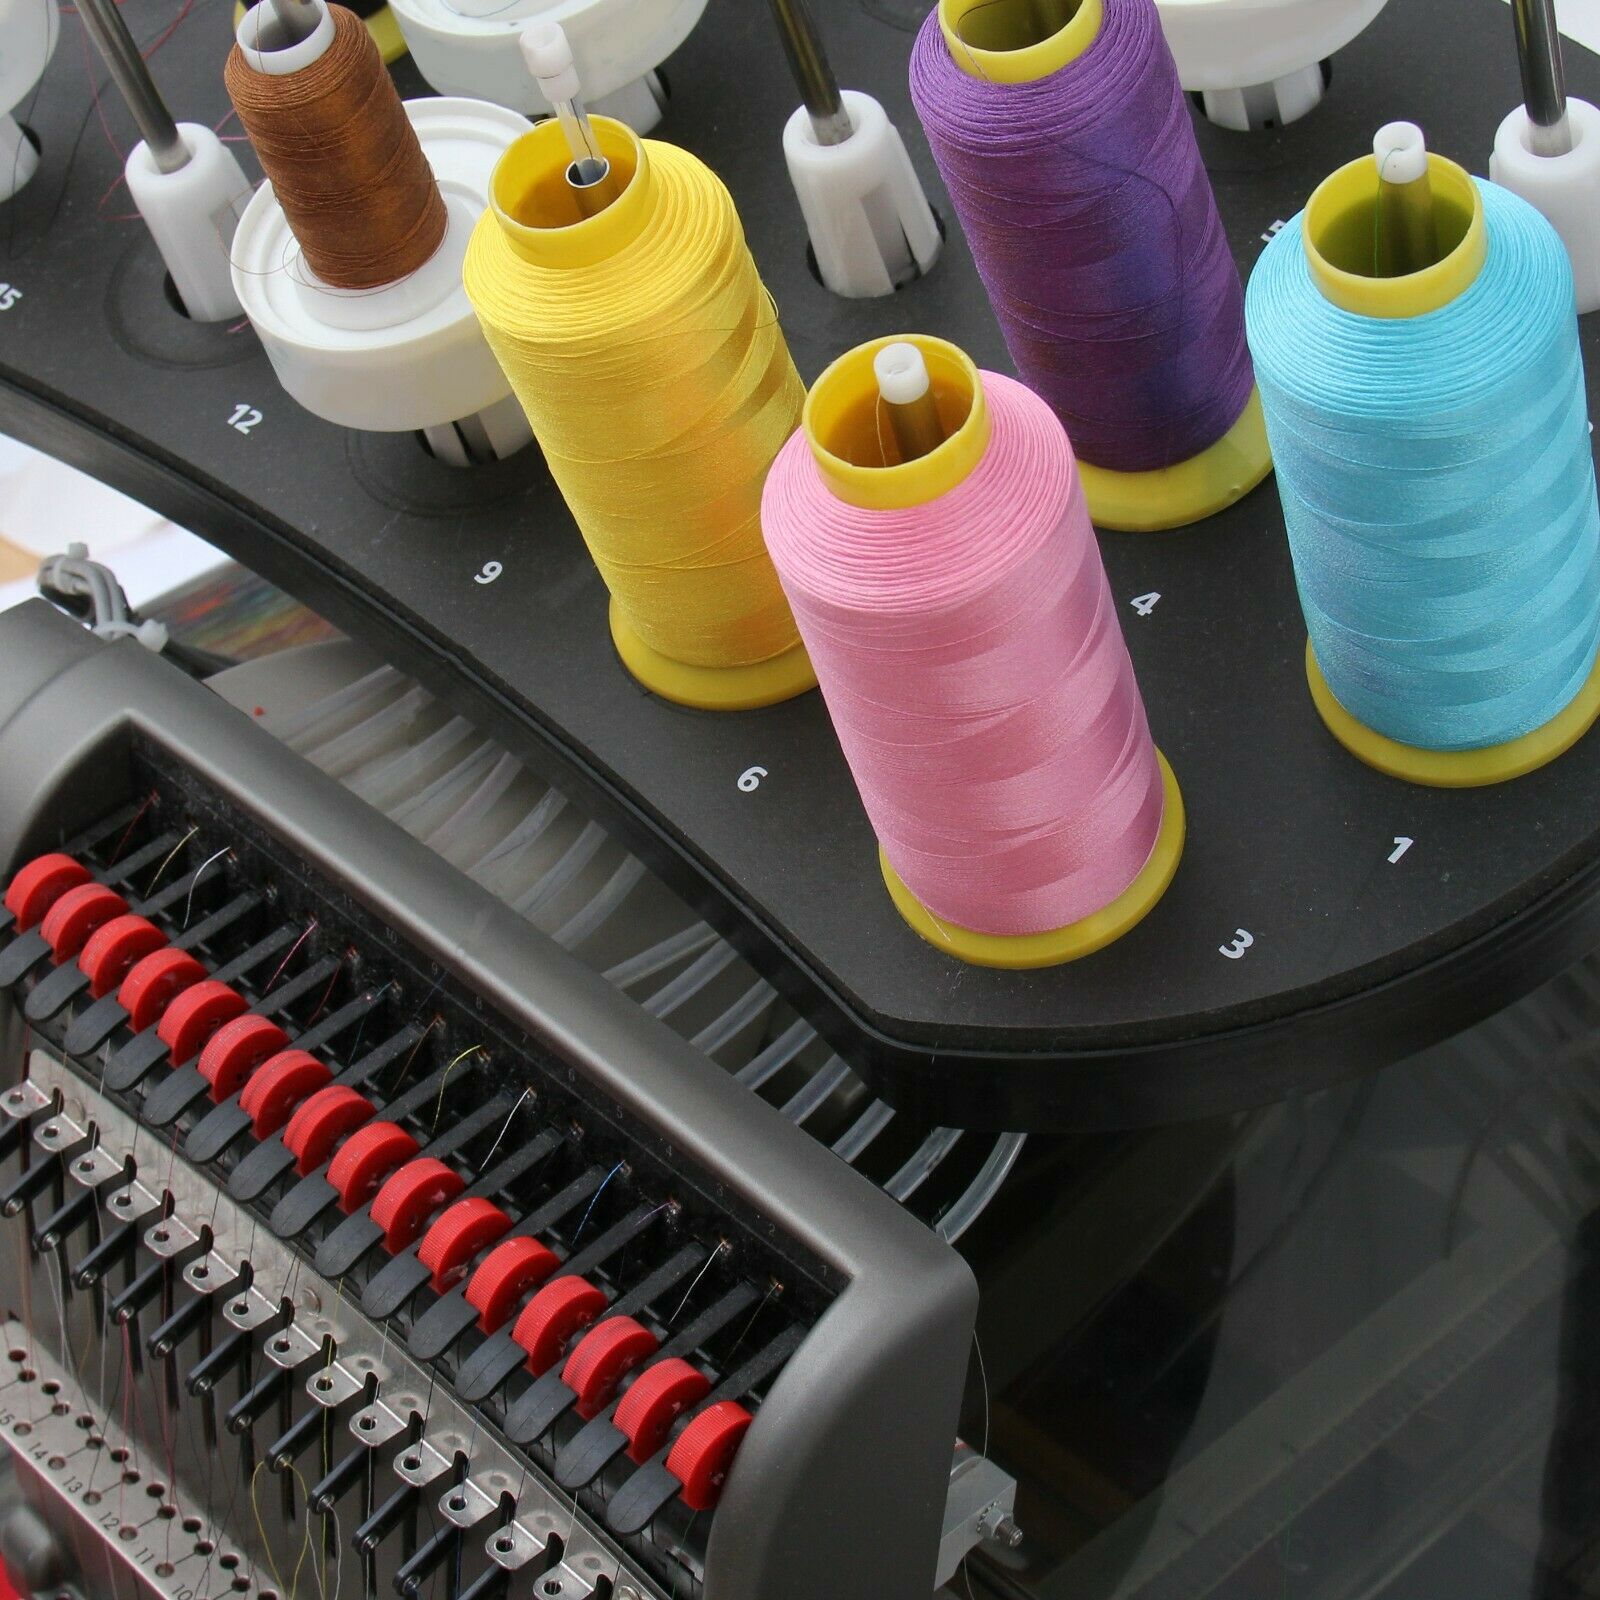 Polyester Machine Embroidery Thread | Huge 5000m (5500 Yard) Cones